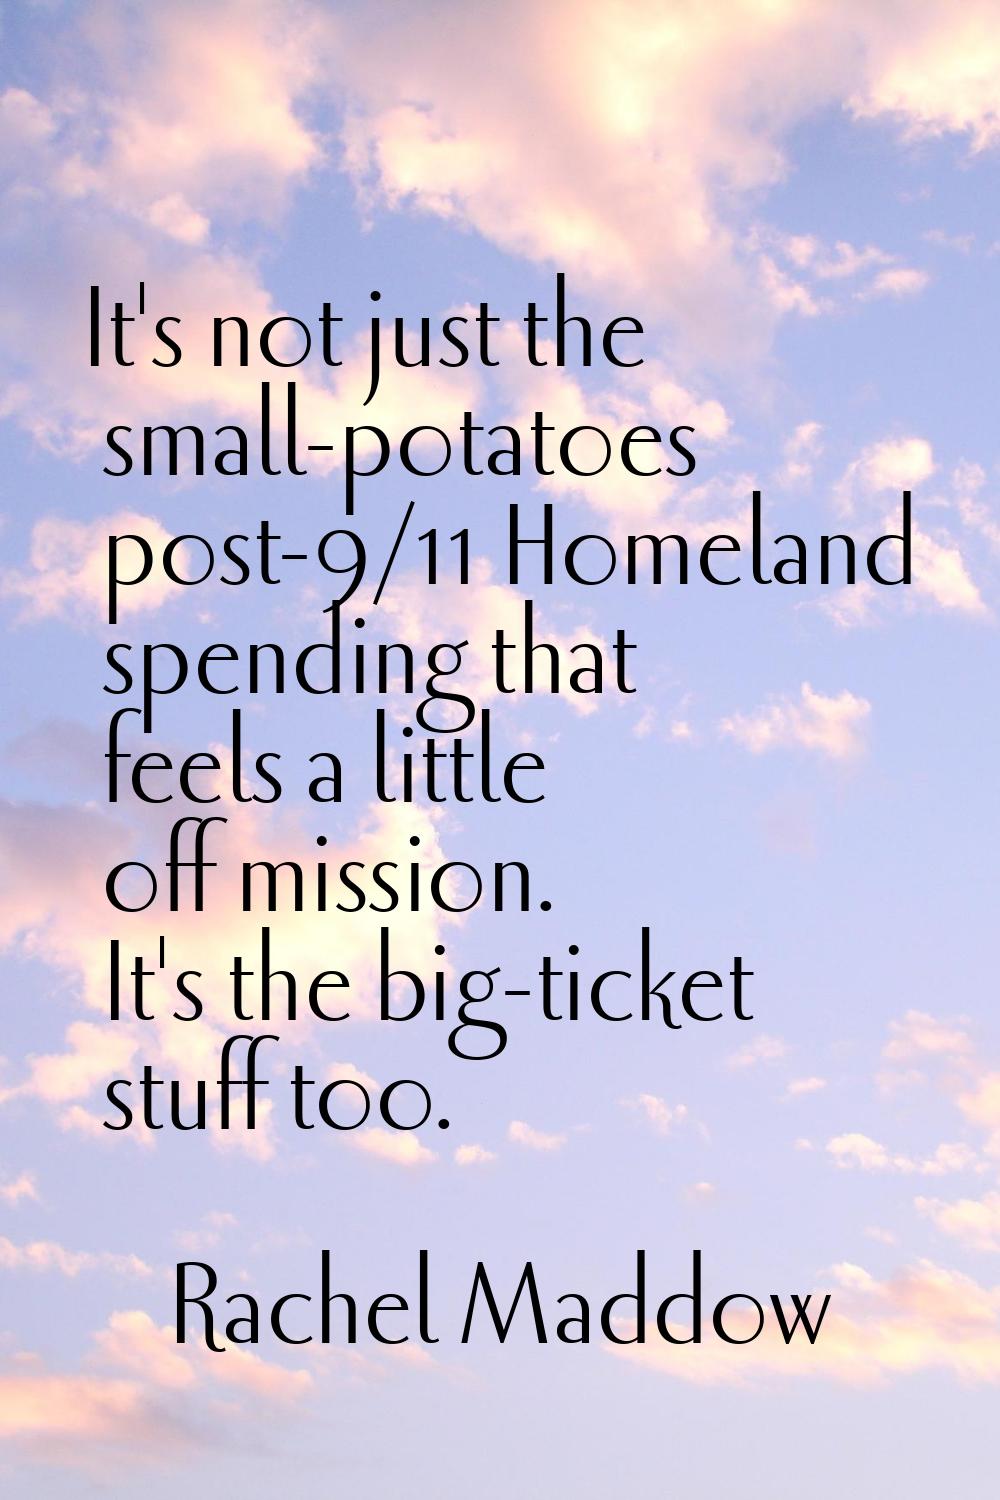 It's not just the small-potatoes post-9/11 Homeland spending that feels a little off mission. It's 